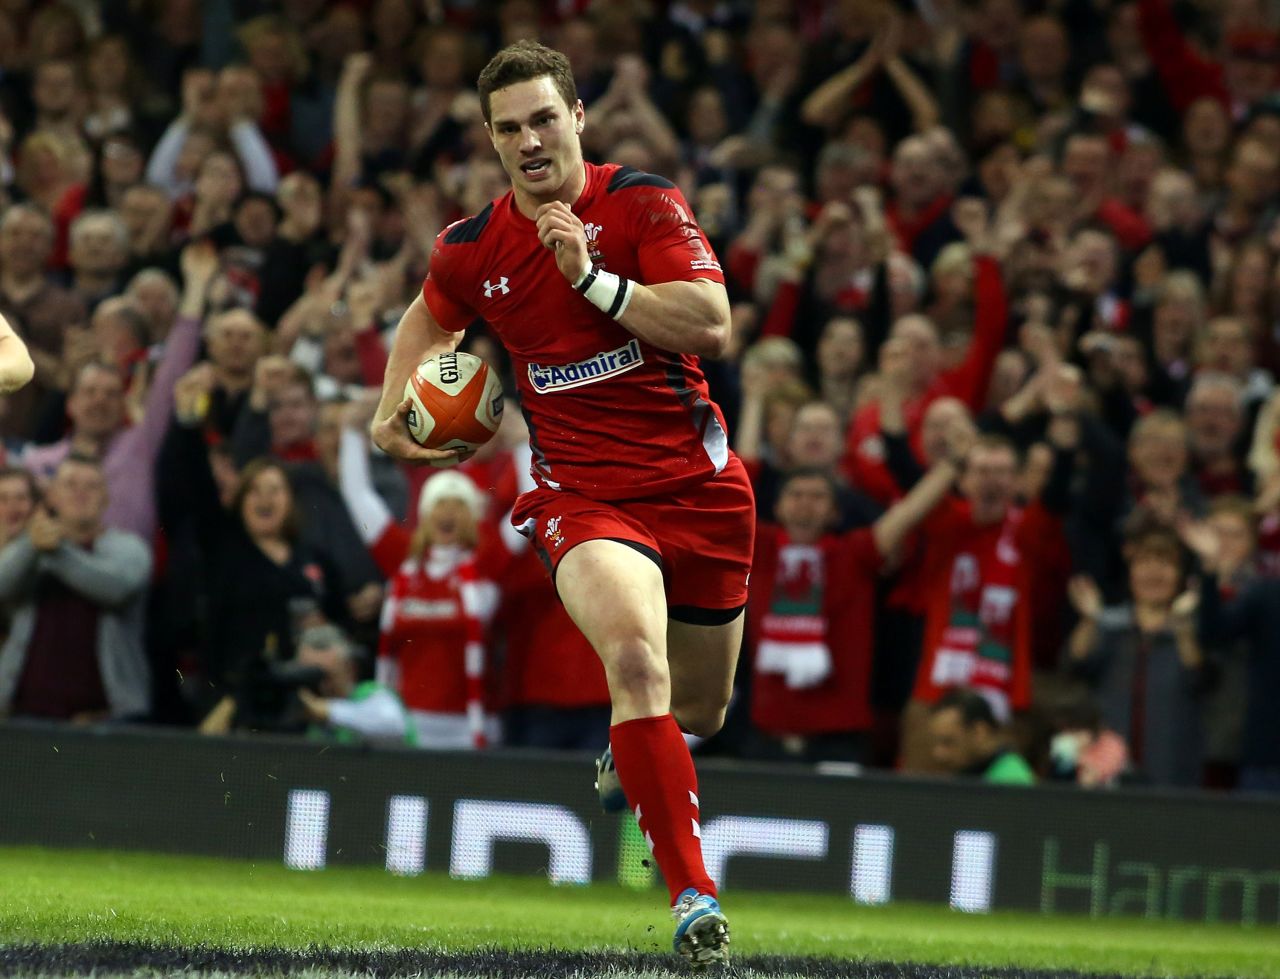 If Wales is to enjoy success at the World Cup then you can bet George North will be one of the main factors behind it. The winger was the first teenager in the history of international rugby to score 10 tries before his 20th birthday. Now 23, he is lethal when given space and difficult to stop once he gets his groove on, though he has been hampered by multiple concussions in the past year.